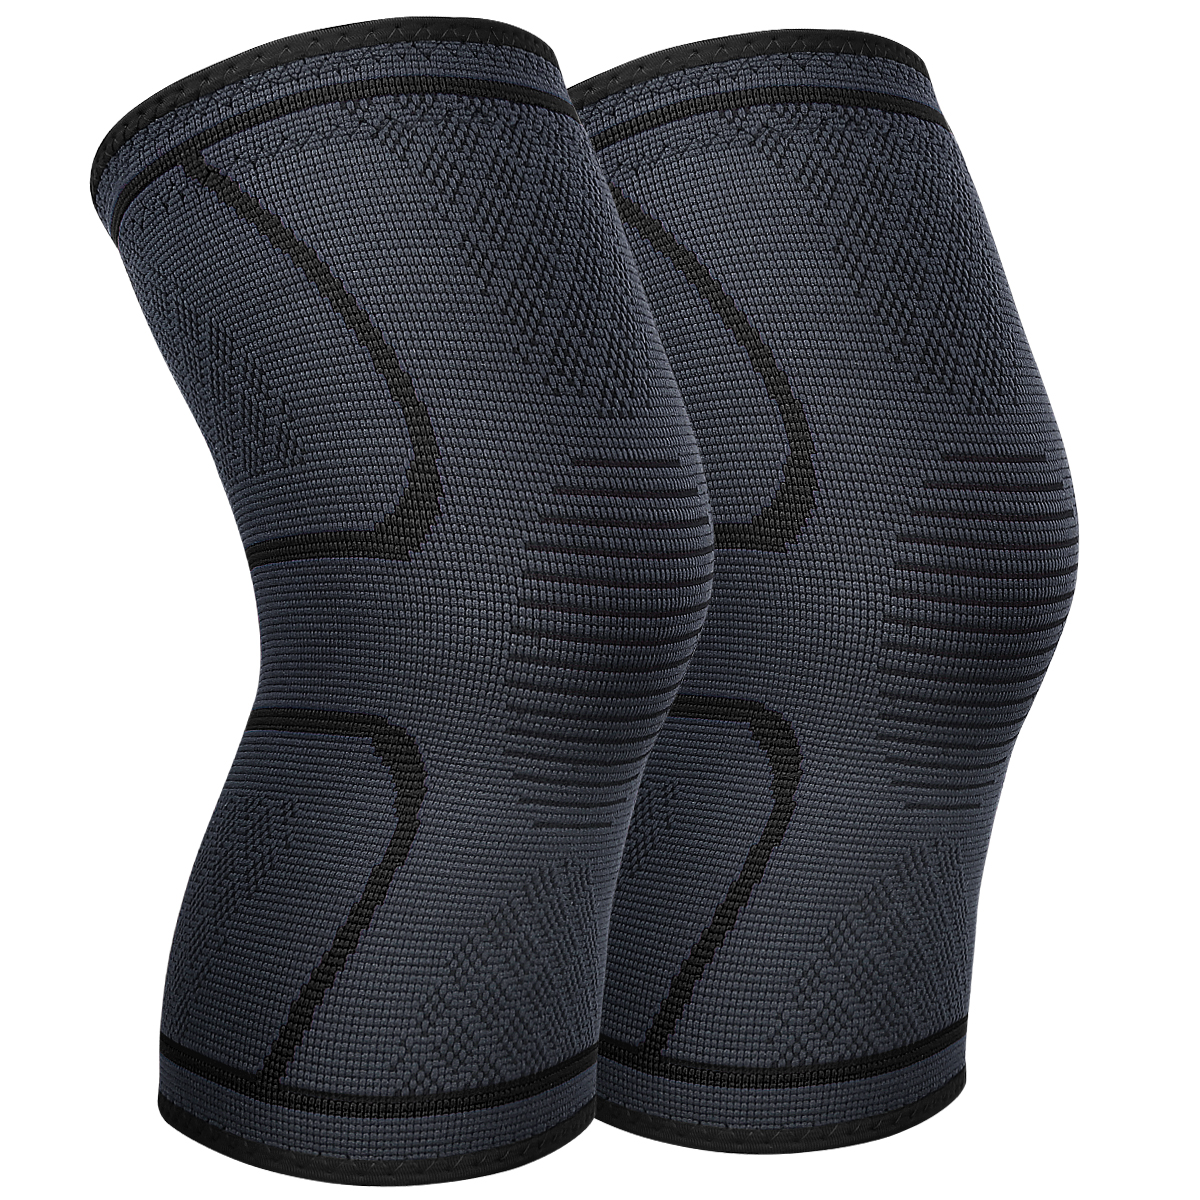 Knee Brace Support Pair for Men Women, AVIDDA Compression Knee Sleeve for Joint Pain Relief, Arthritis, Meniscus Tear, Injury Recovery, Running, Squats, Weight Lifting, Football Gray S